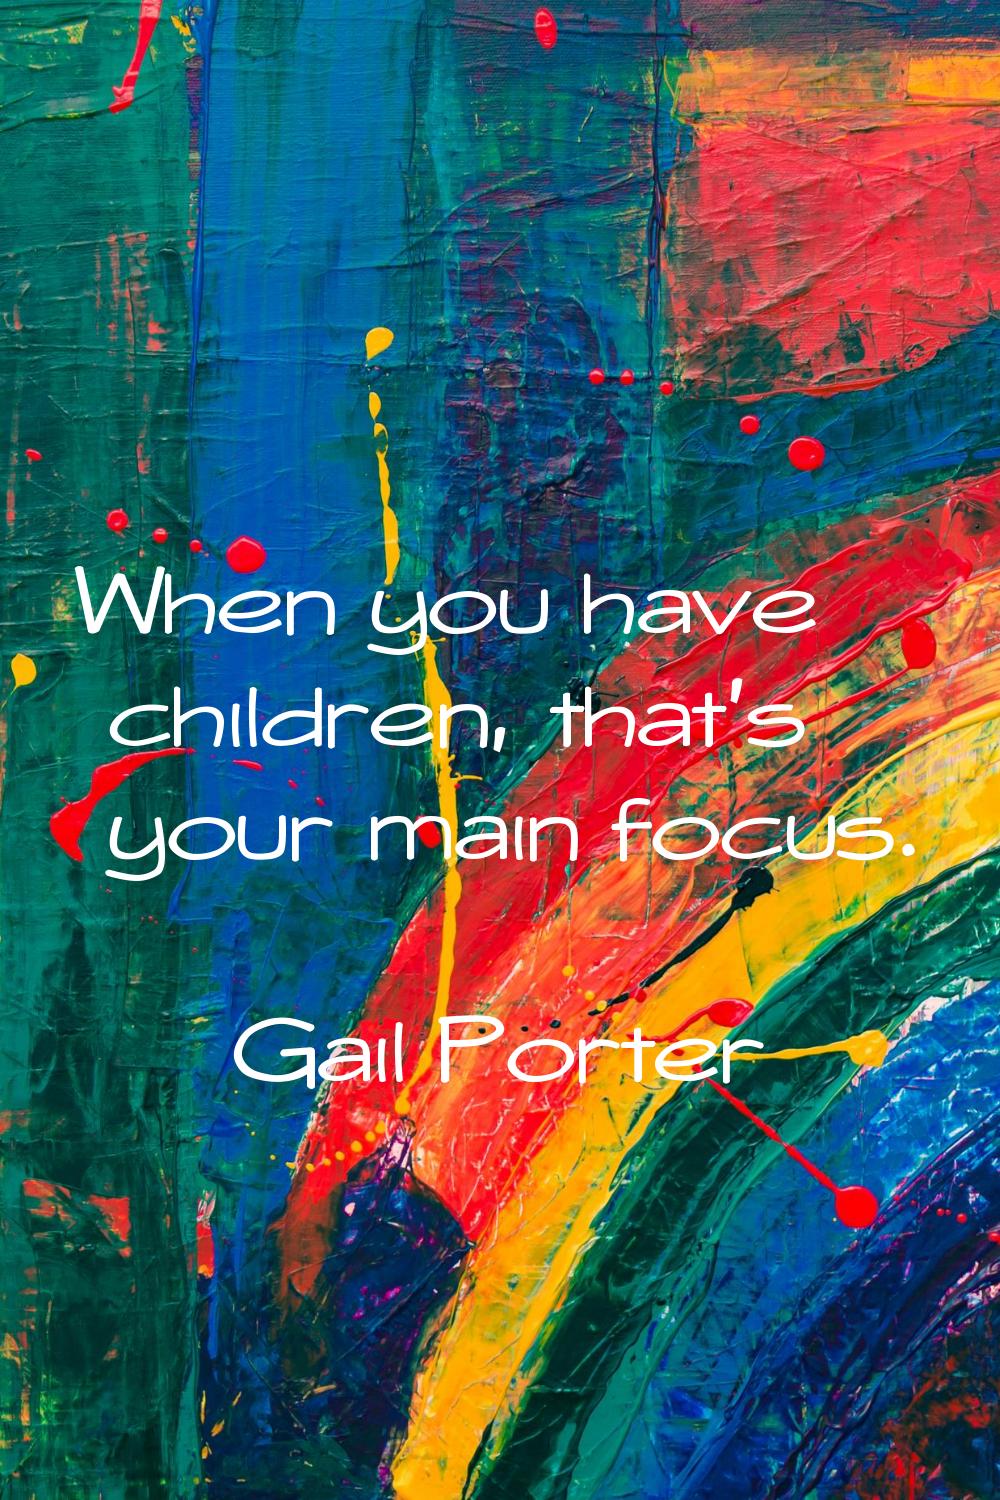 When you have children, that's your main focus.